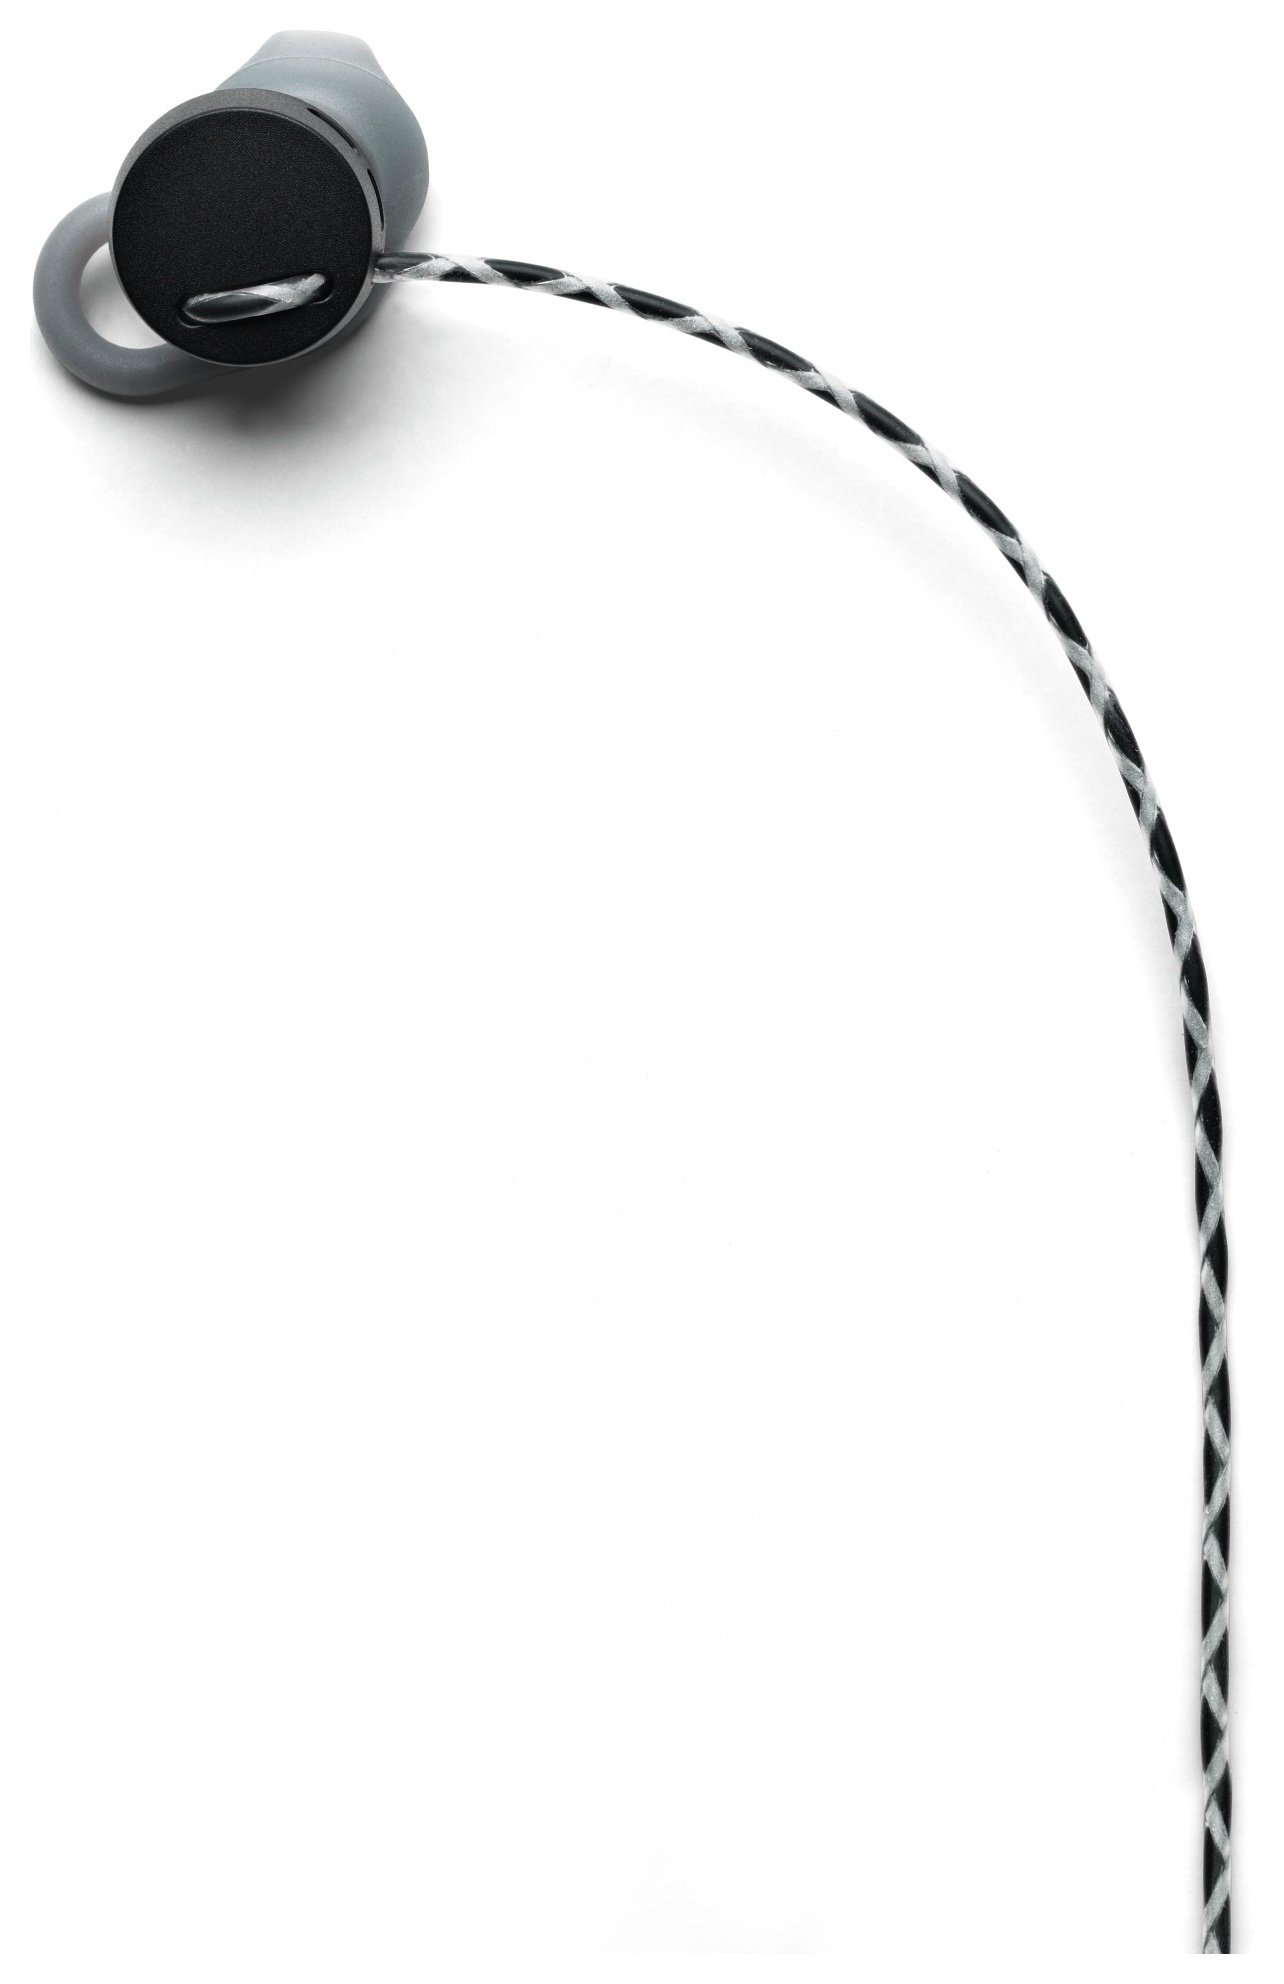 Urbanears Reimers review